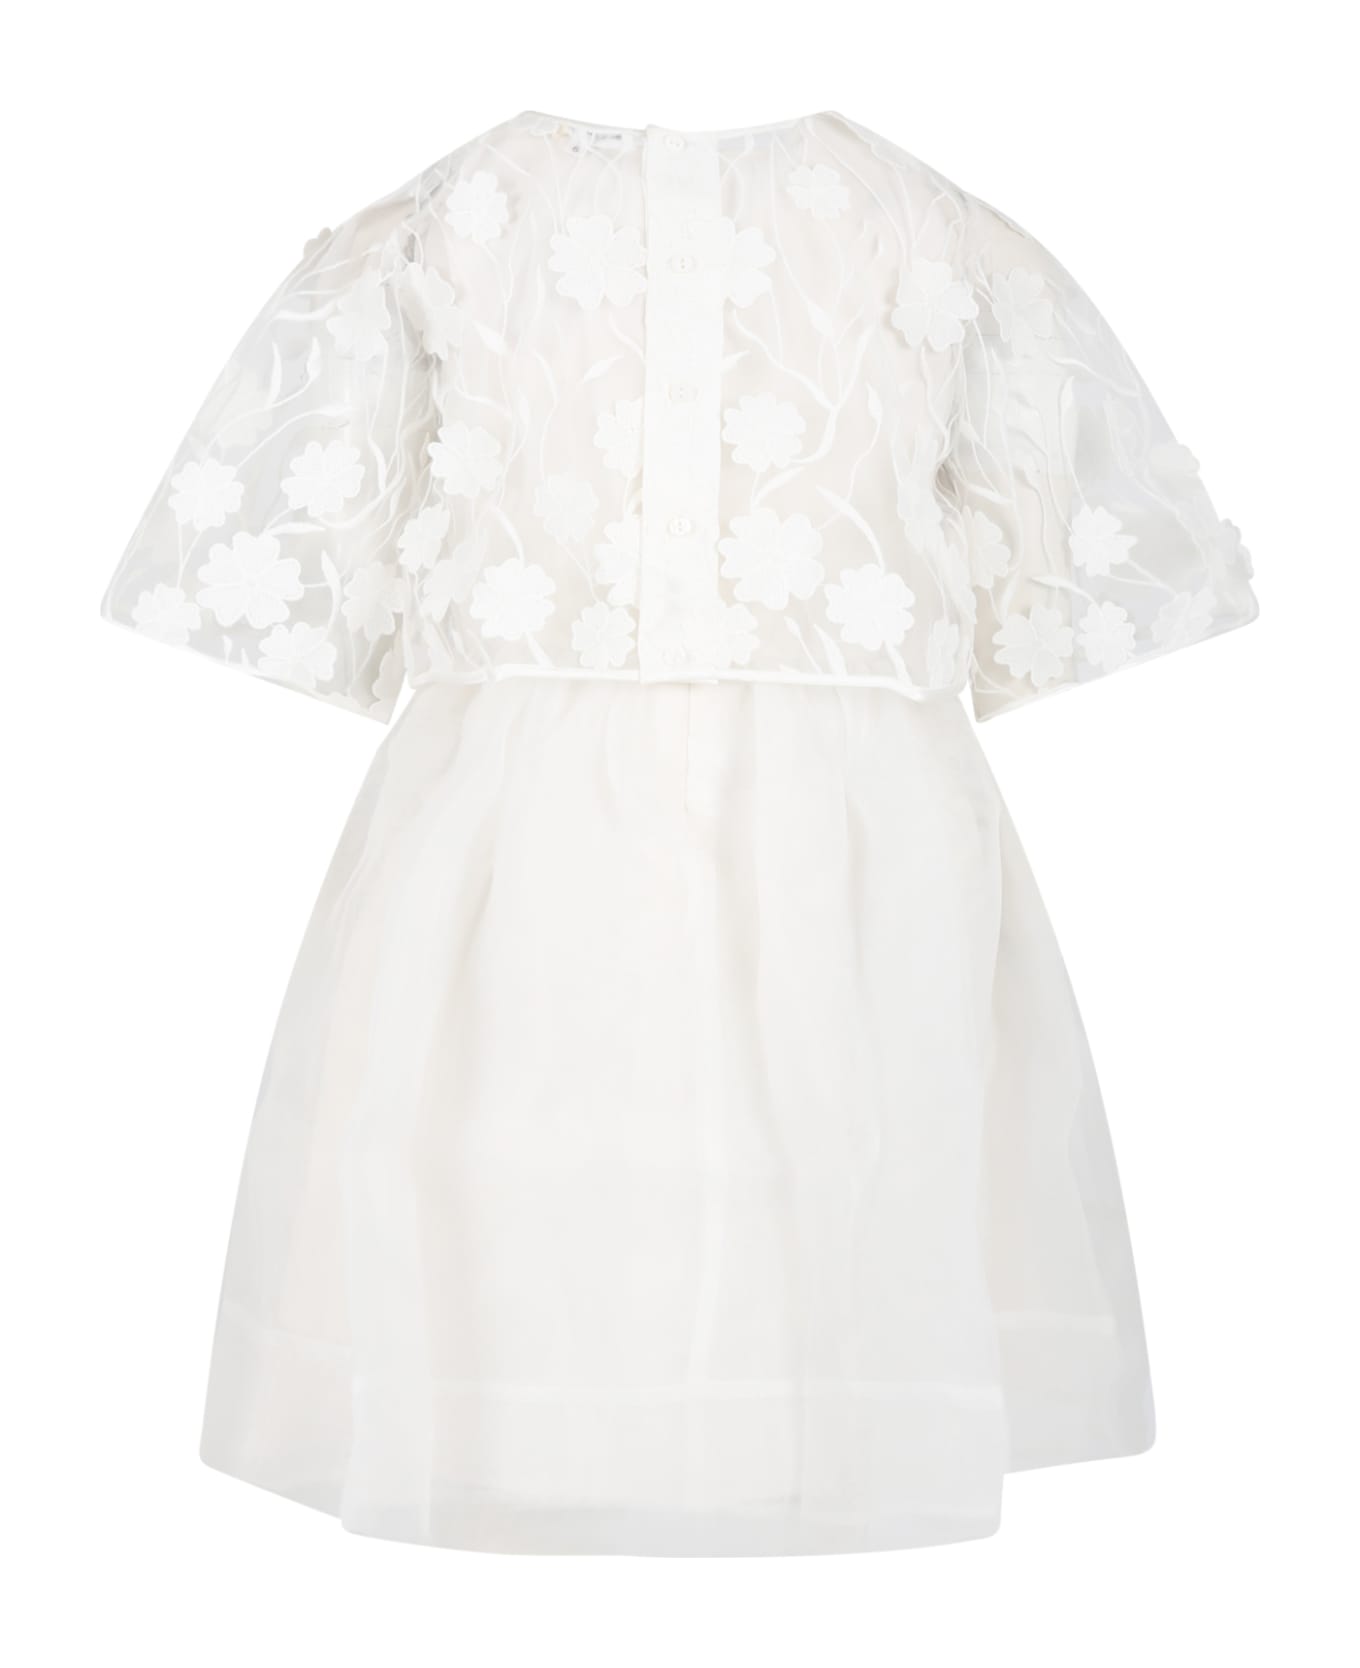 Charabia White Dress For Girl With Lace - Ivory